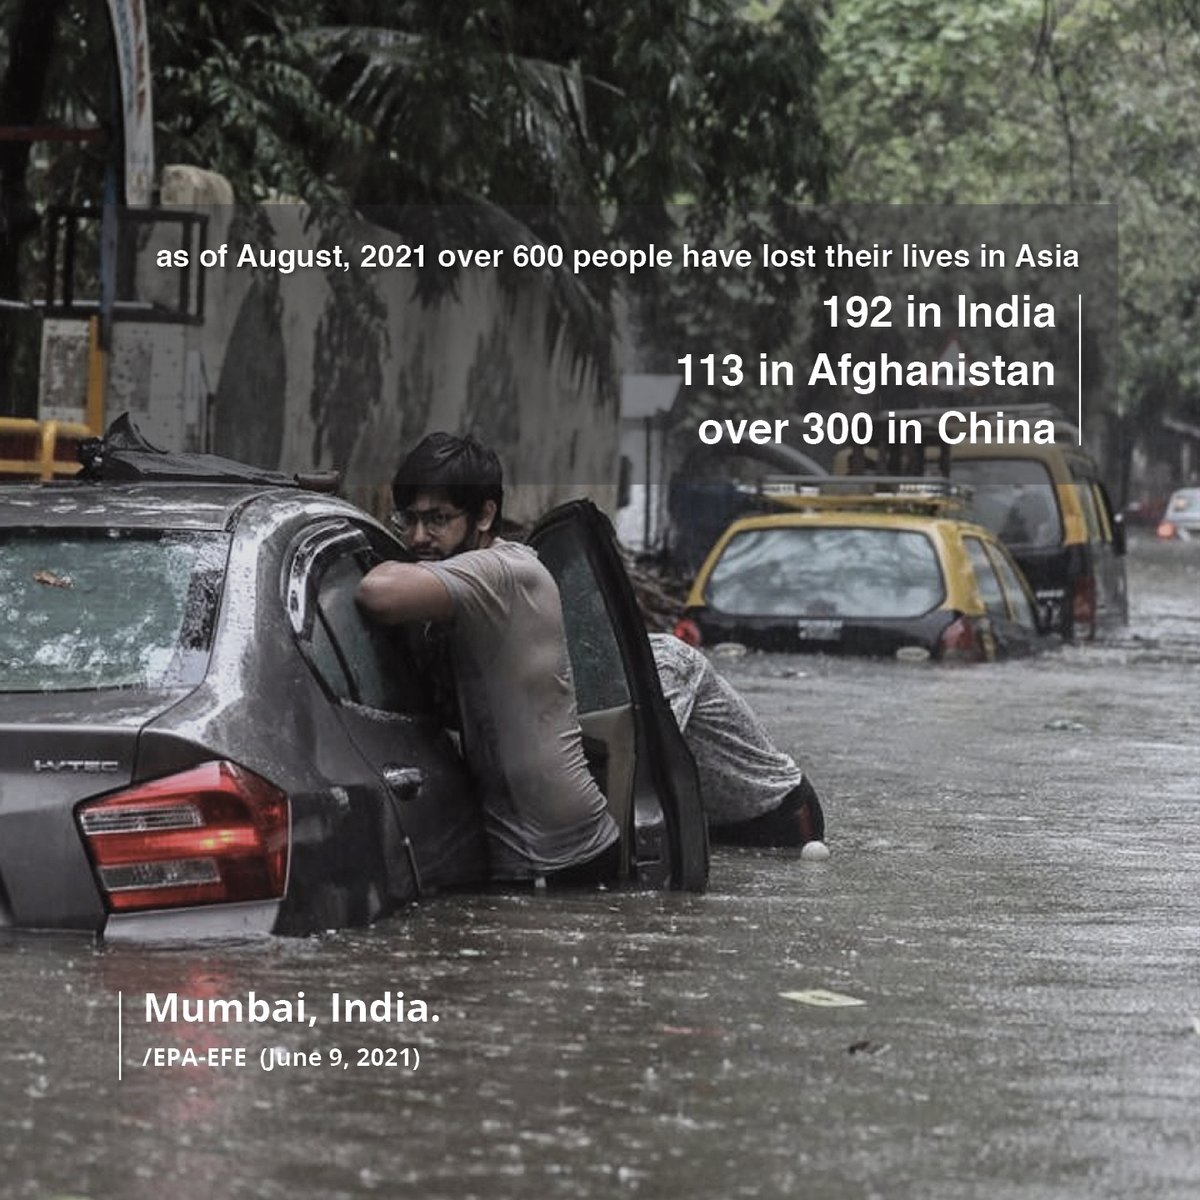 Floods across the world have affected over 20 countries including China, Belgium and India. 

This has seen an average of 15-20cm of rain in 24 hours in some parts and the loss of over 600 lives in Asia and 228 in Europe.

It again highlights how #climateaction is needed! #SDG13